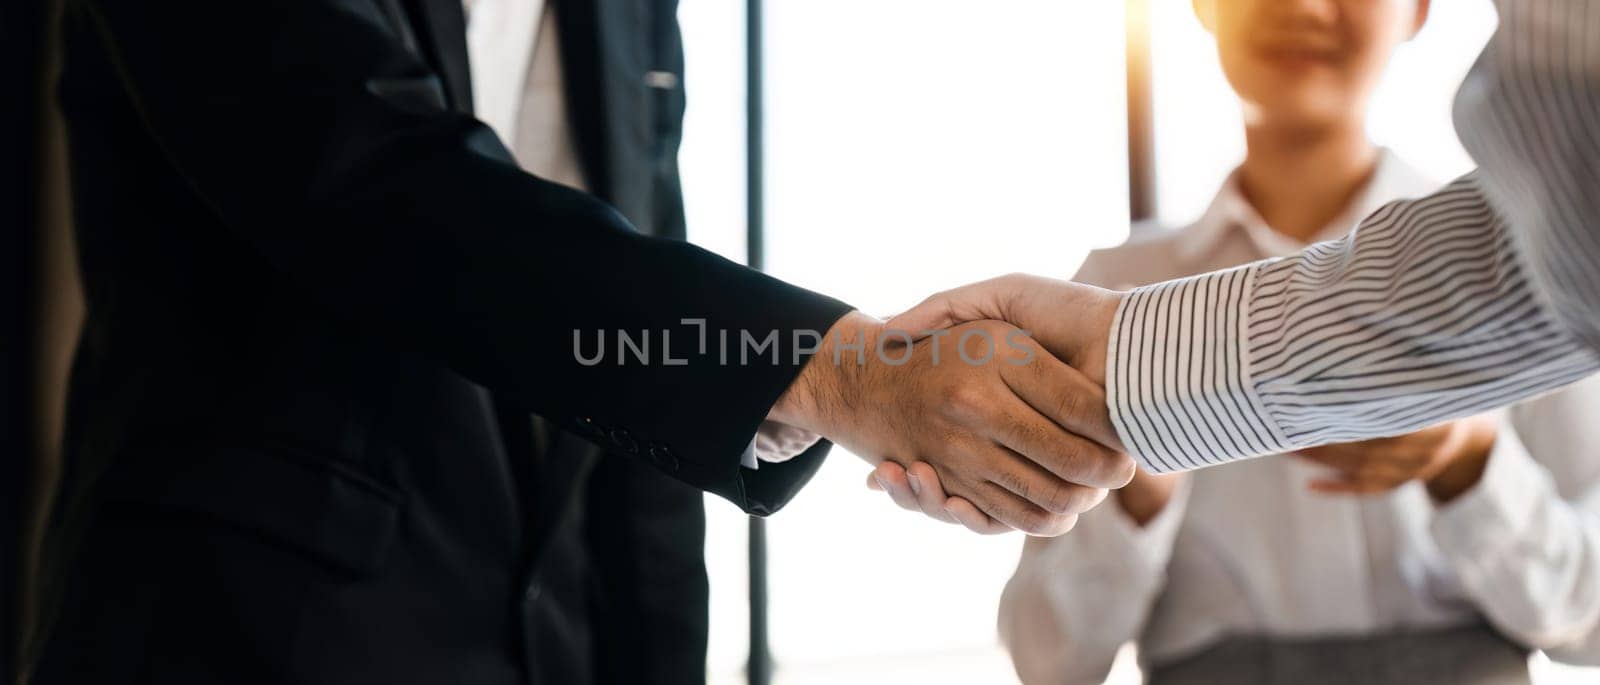 Businessmen making handshake with his partner - business etiquette, congratulation, merger and acquisition concept by nateemee